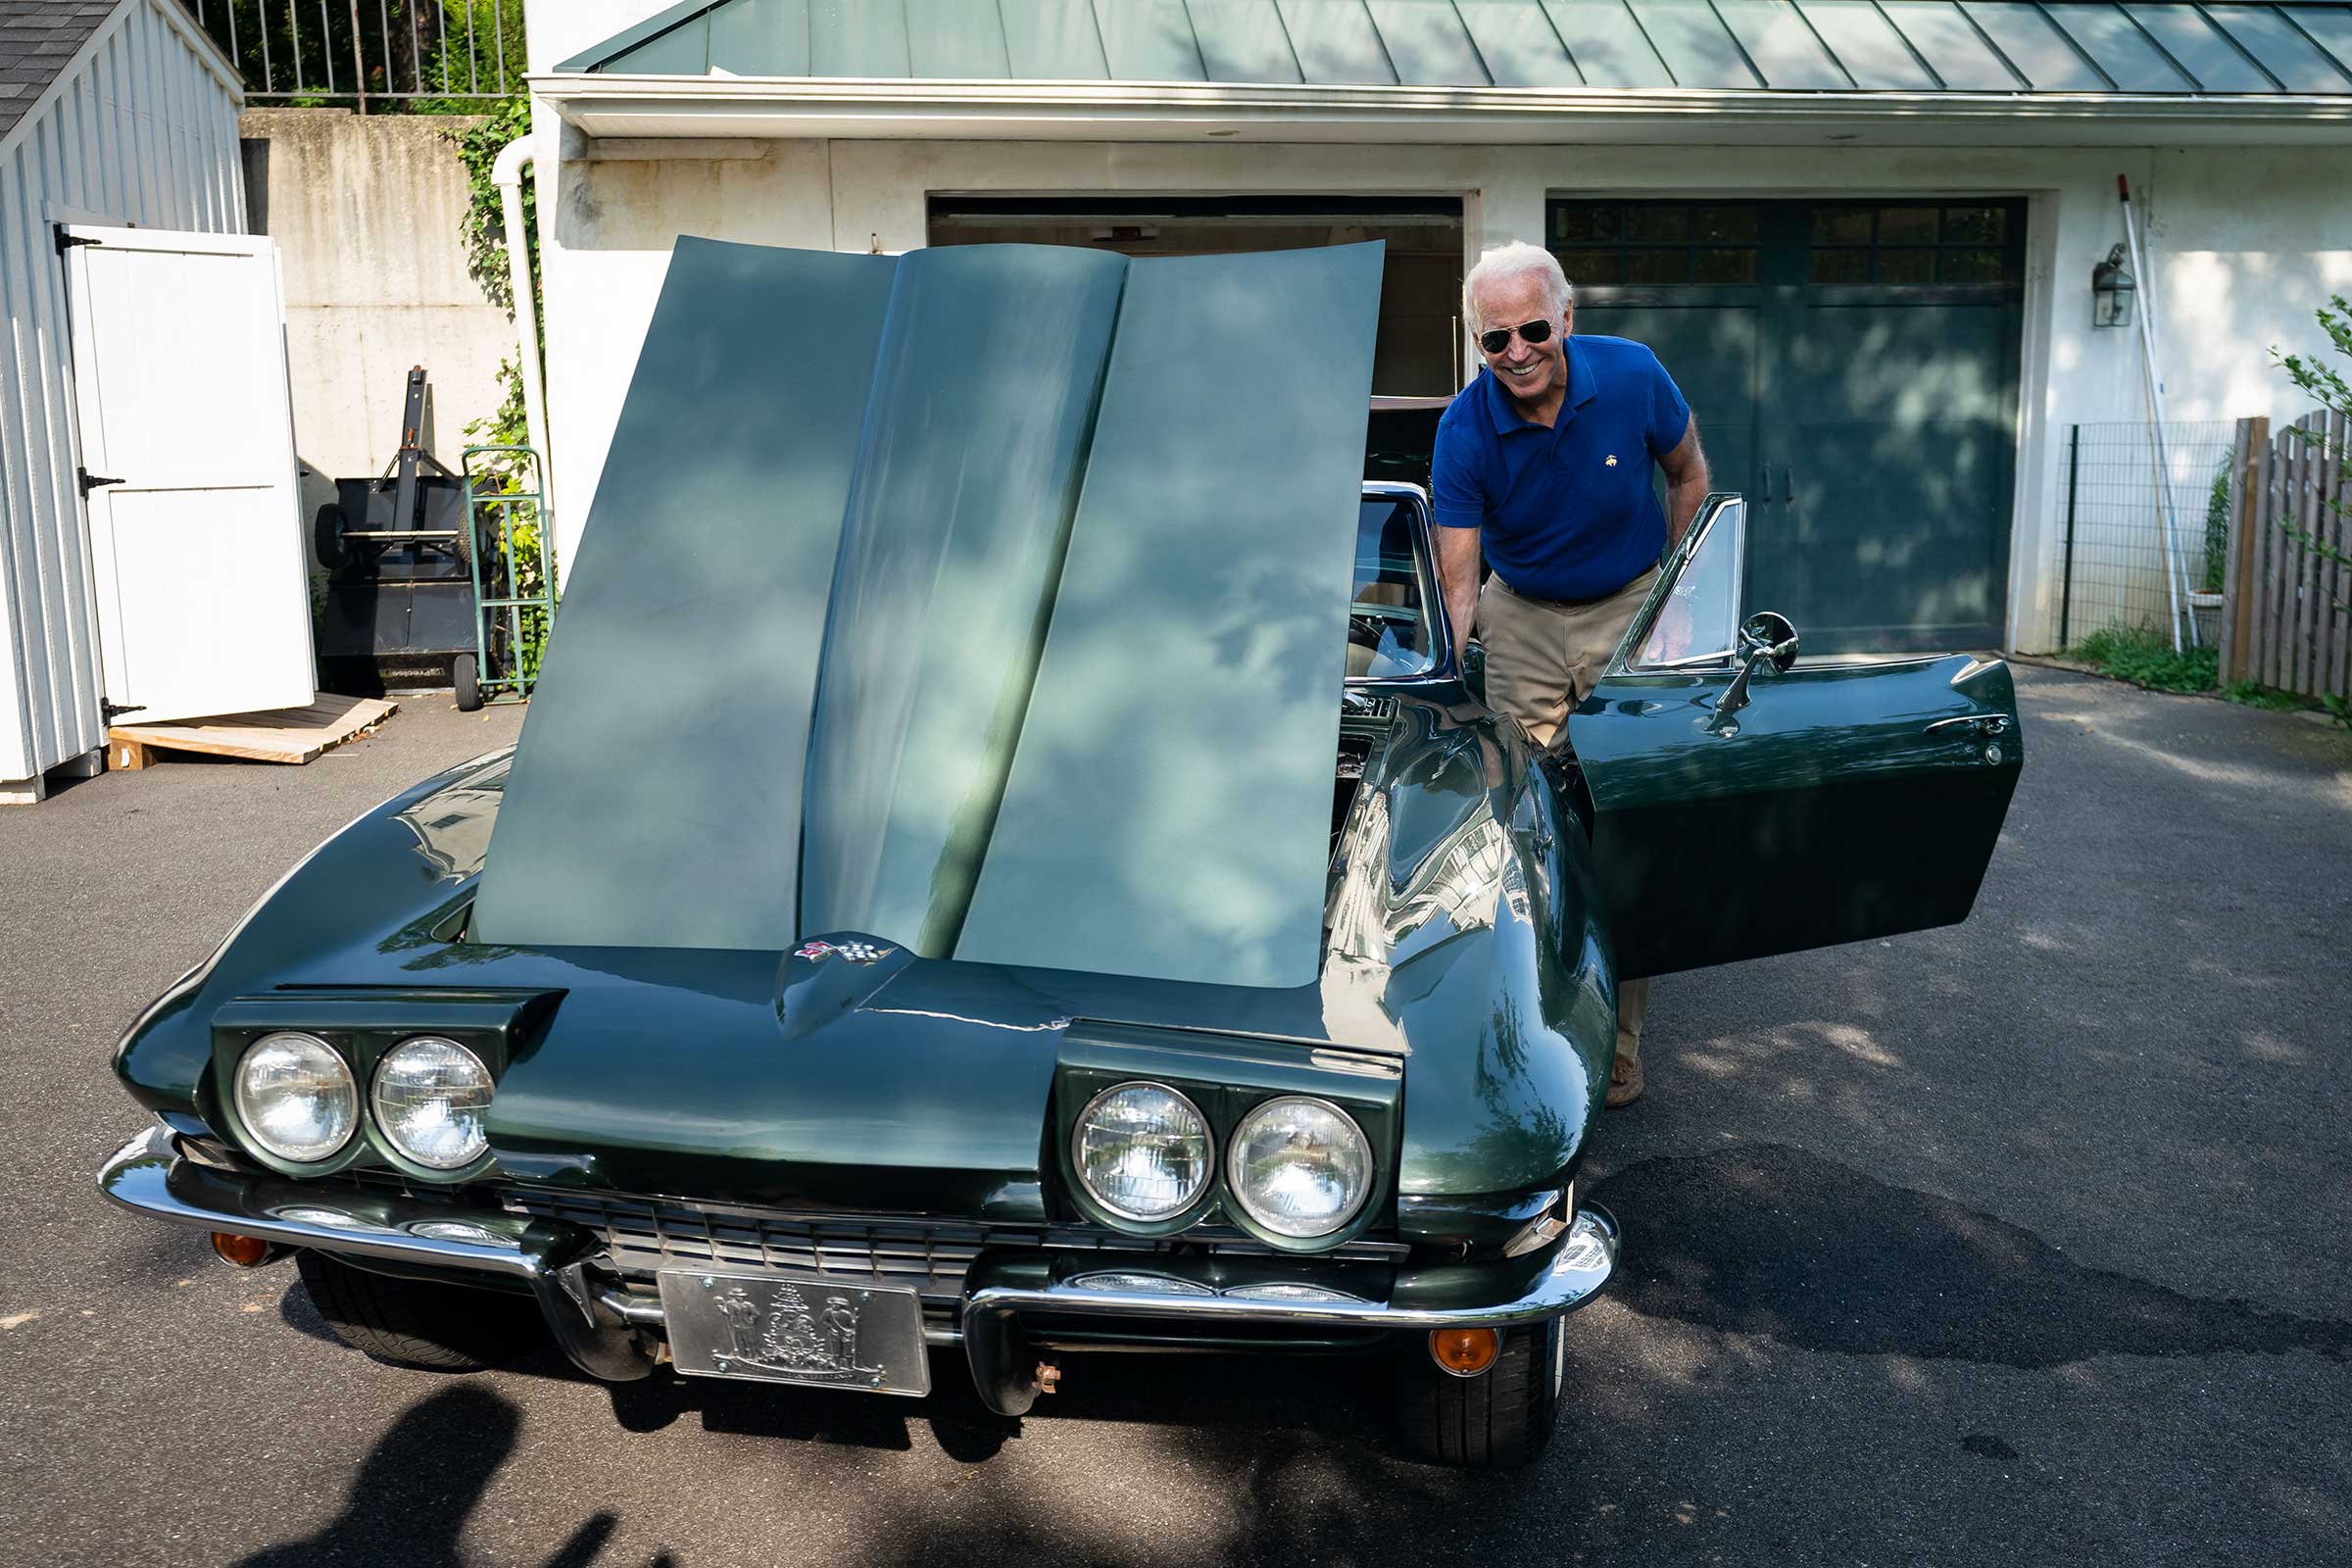 Classified documents were found as part of a personal library in the garage of President Joe Biden. Biden is pictured here with his Corvette Stingray in Wilmington, DE on July 16, 2020. (Adam Schultz—Biden for President)